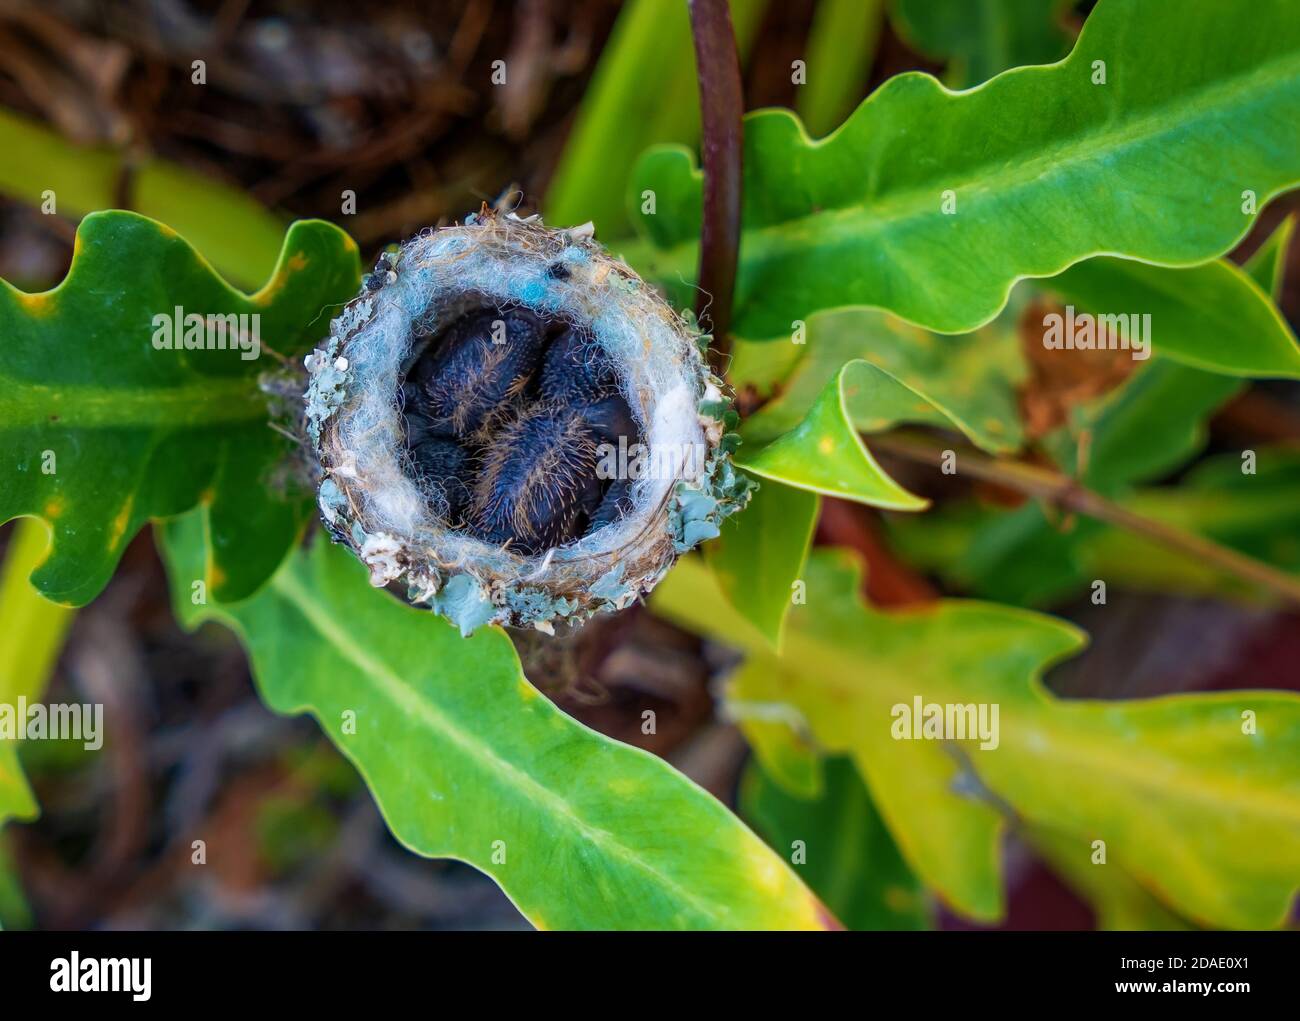 Two hummingbird chicks in their nest surrounded by vegetation Stock Photo